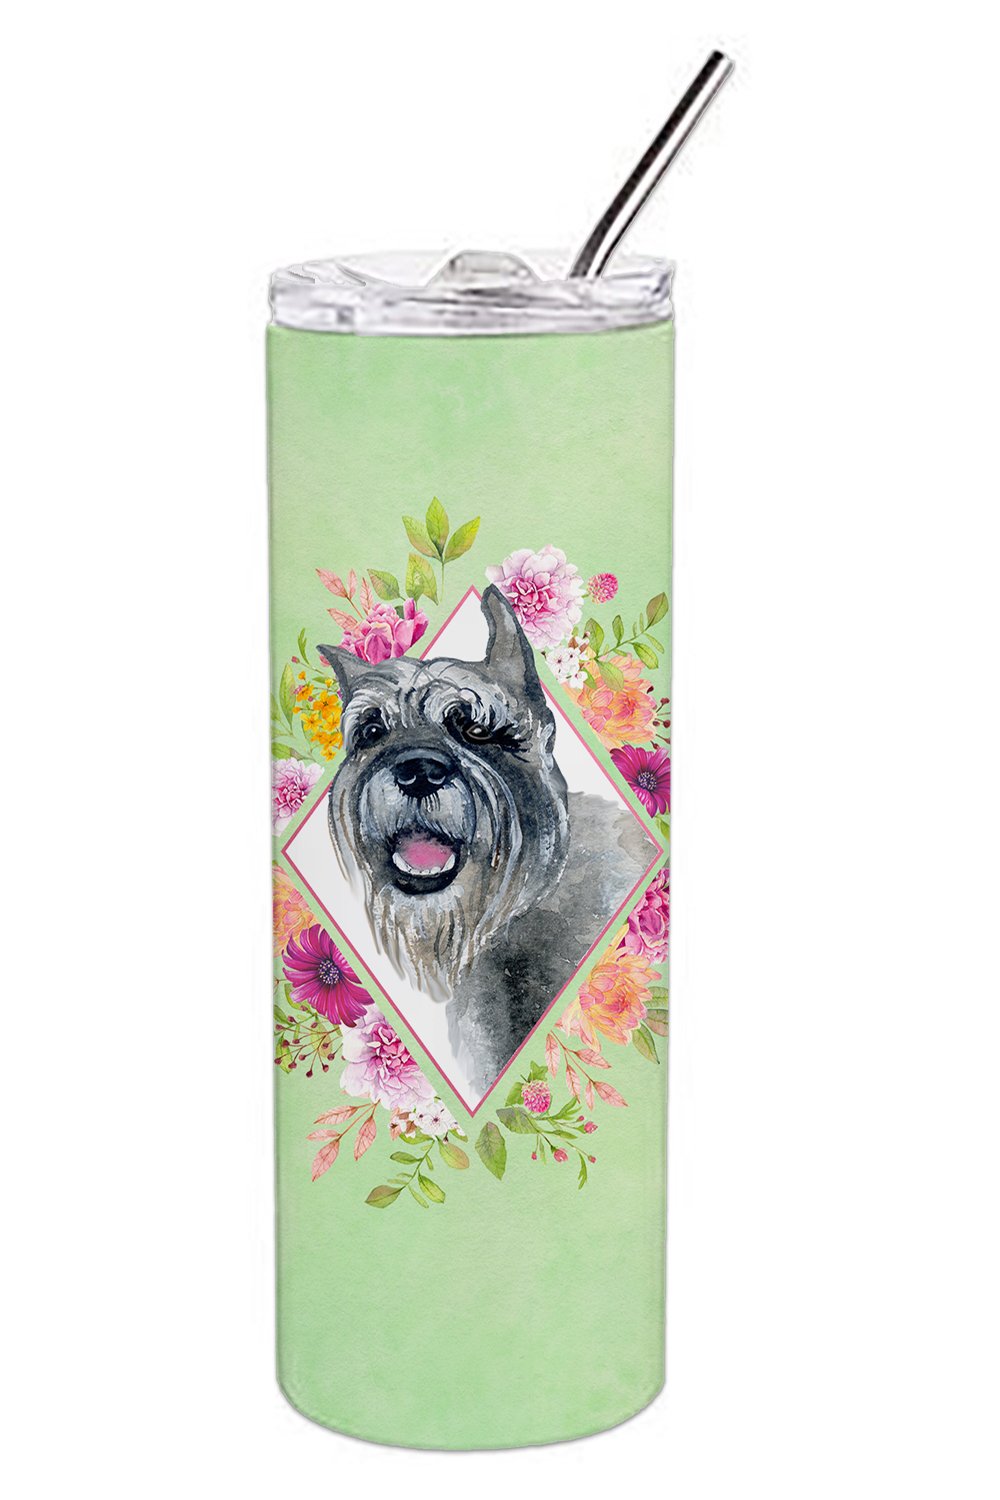 Schnauzer Green Flowers Double Walled Stainless Steel 20 oz Skinny Tumbler CK4339TBL20 by Caroline's Treasures